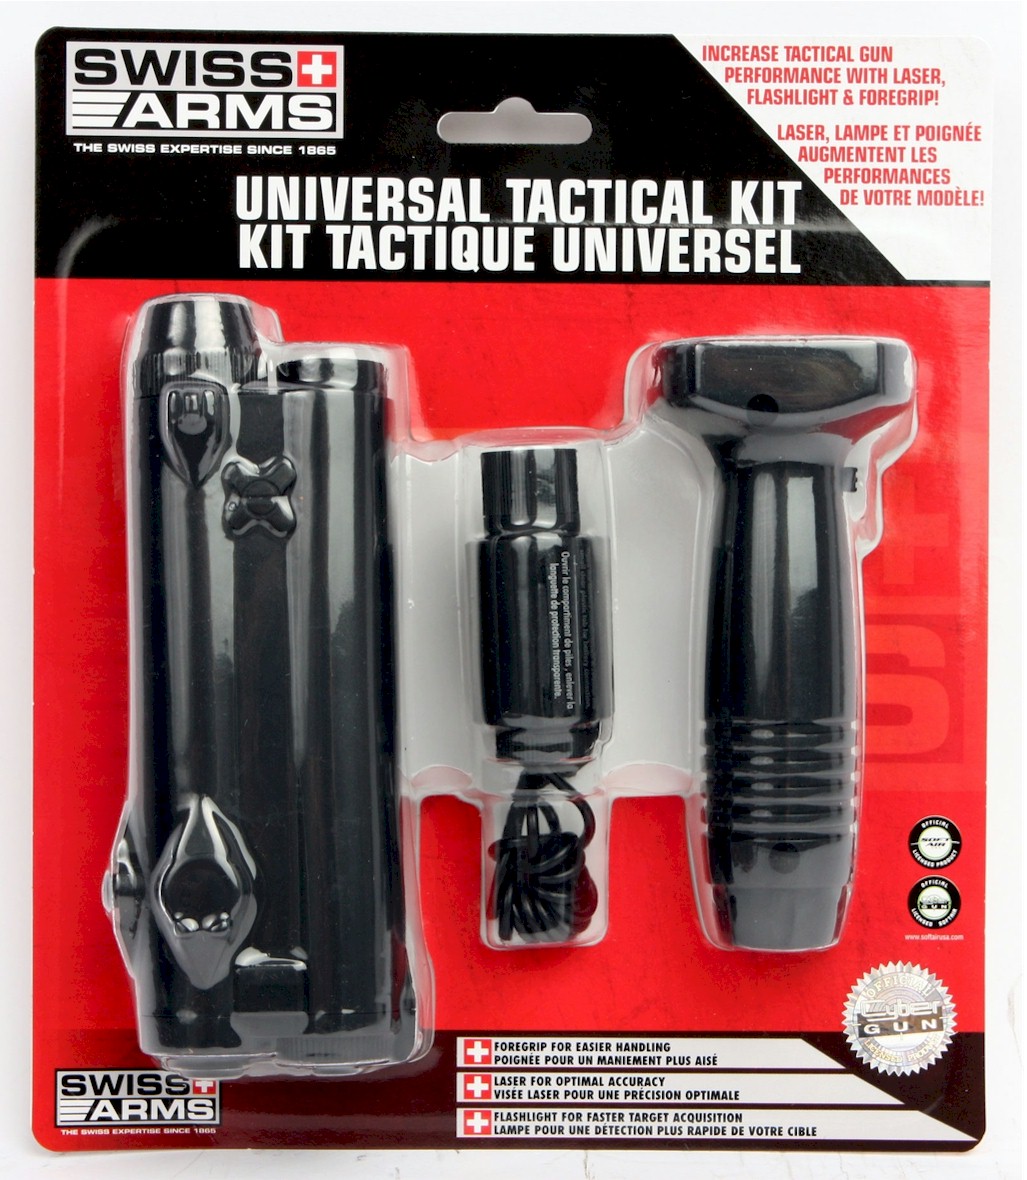 AIRSOFT UNIVERSAL TACTICAL KIT